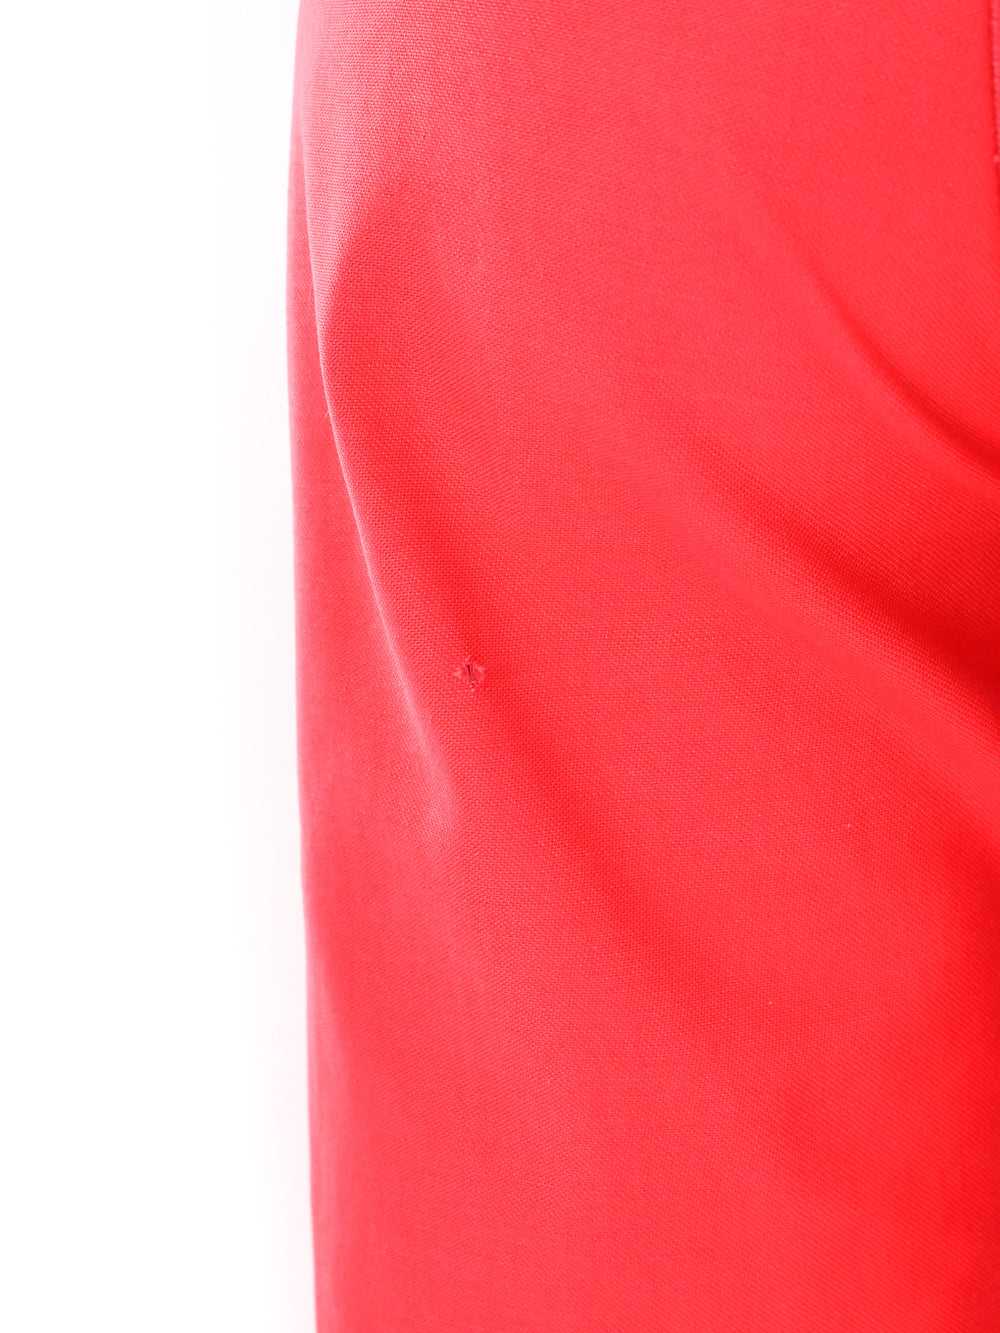 1970's Red Contrast Stitch Flares - image 6